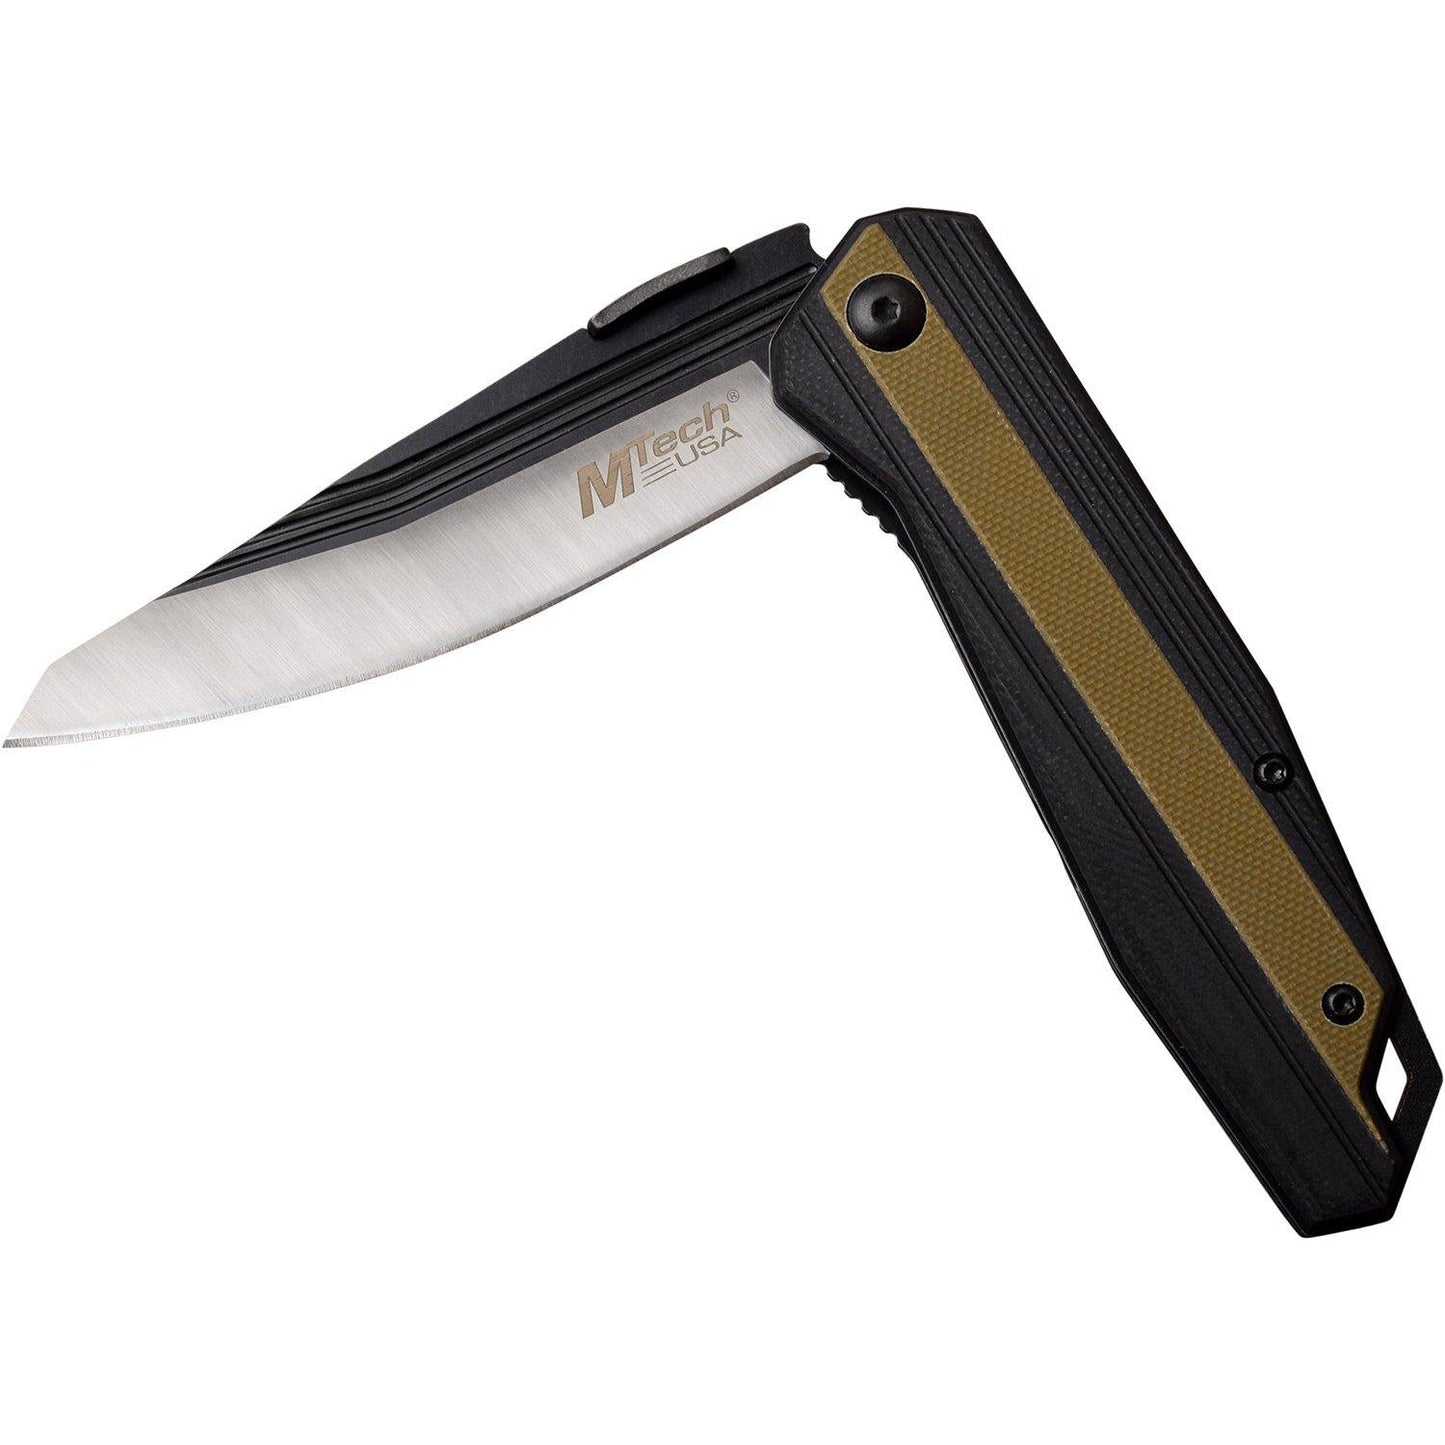 Mtech Drop Point Fine Edge Blade Folding Knife - 8 Inches Overall G10 Handle #mt-1081Tn - Xhunter New Zealand